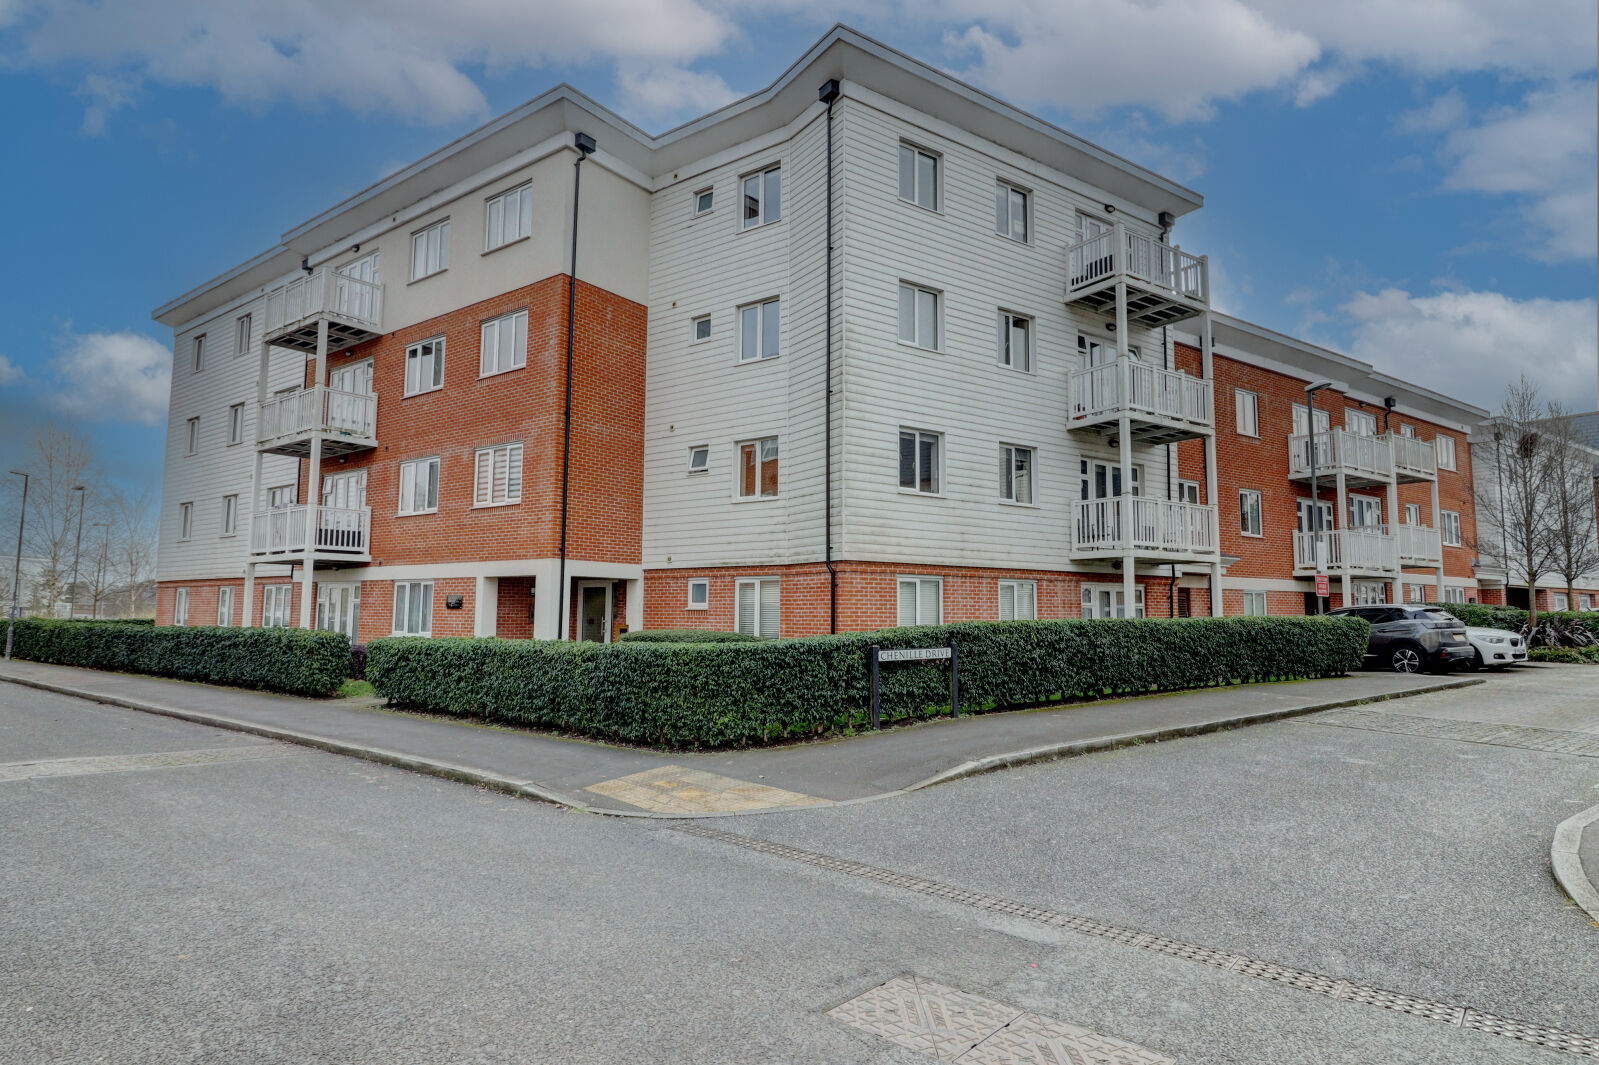 2 bedroom  flat for sale Chequers Avenue, High Wycombe, HP11, main image